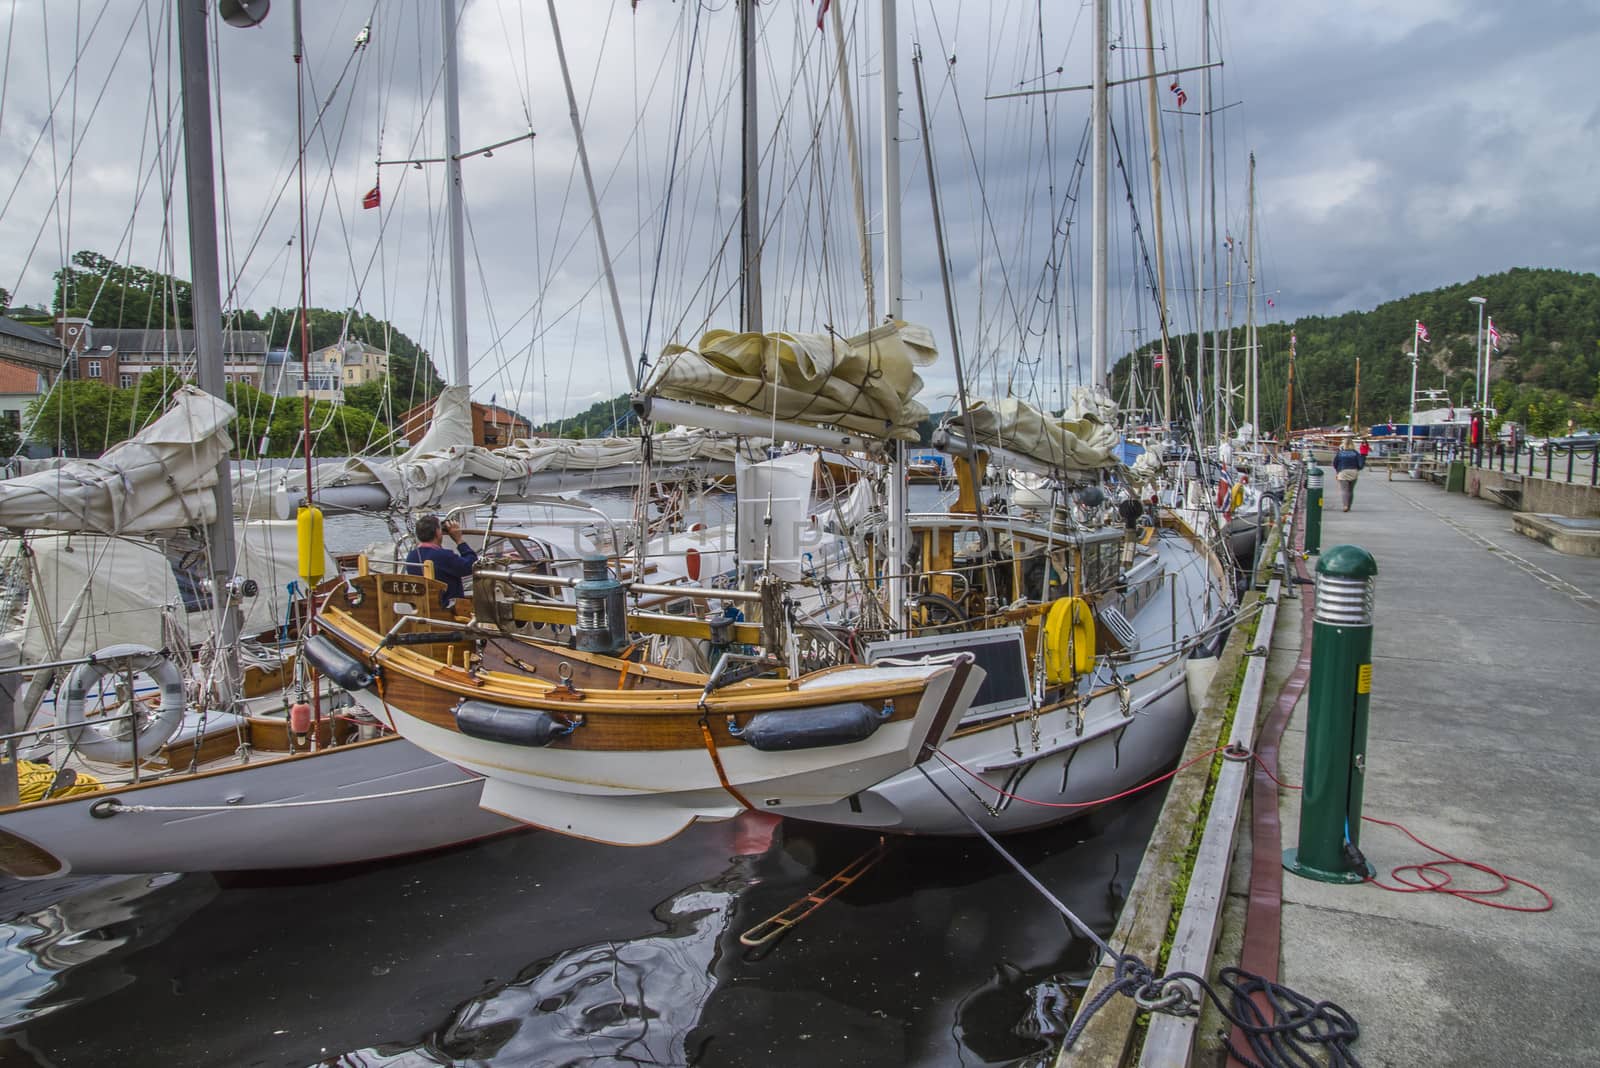 Exhibition of boats in the port of Halden, photo 3 by steirus